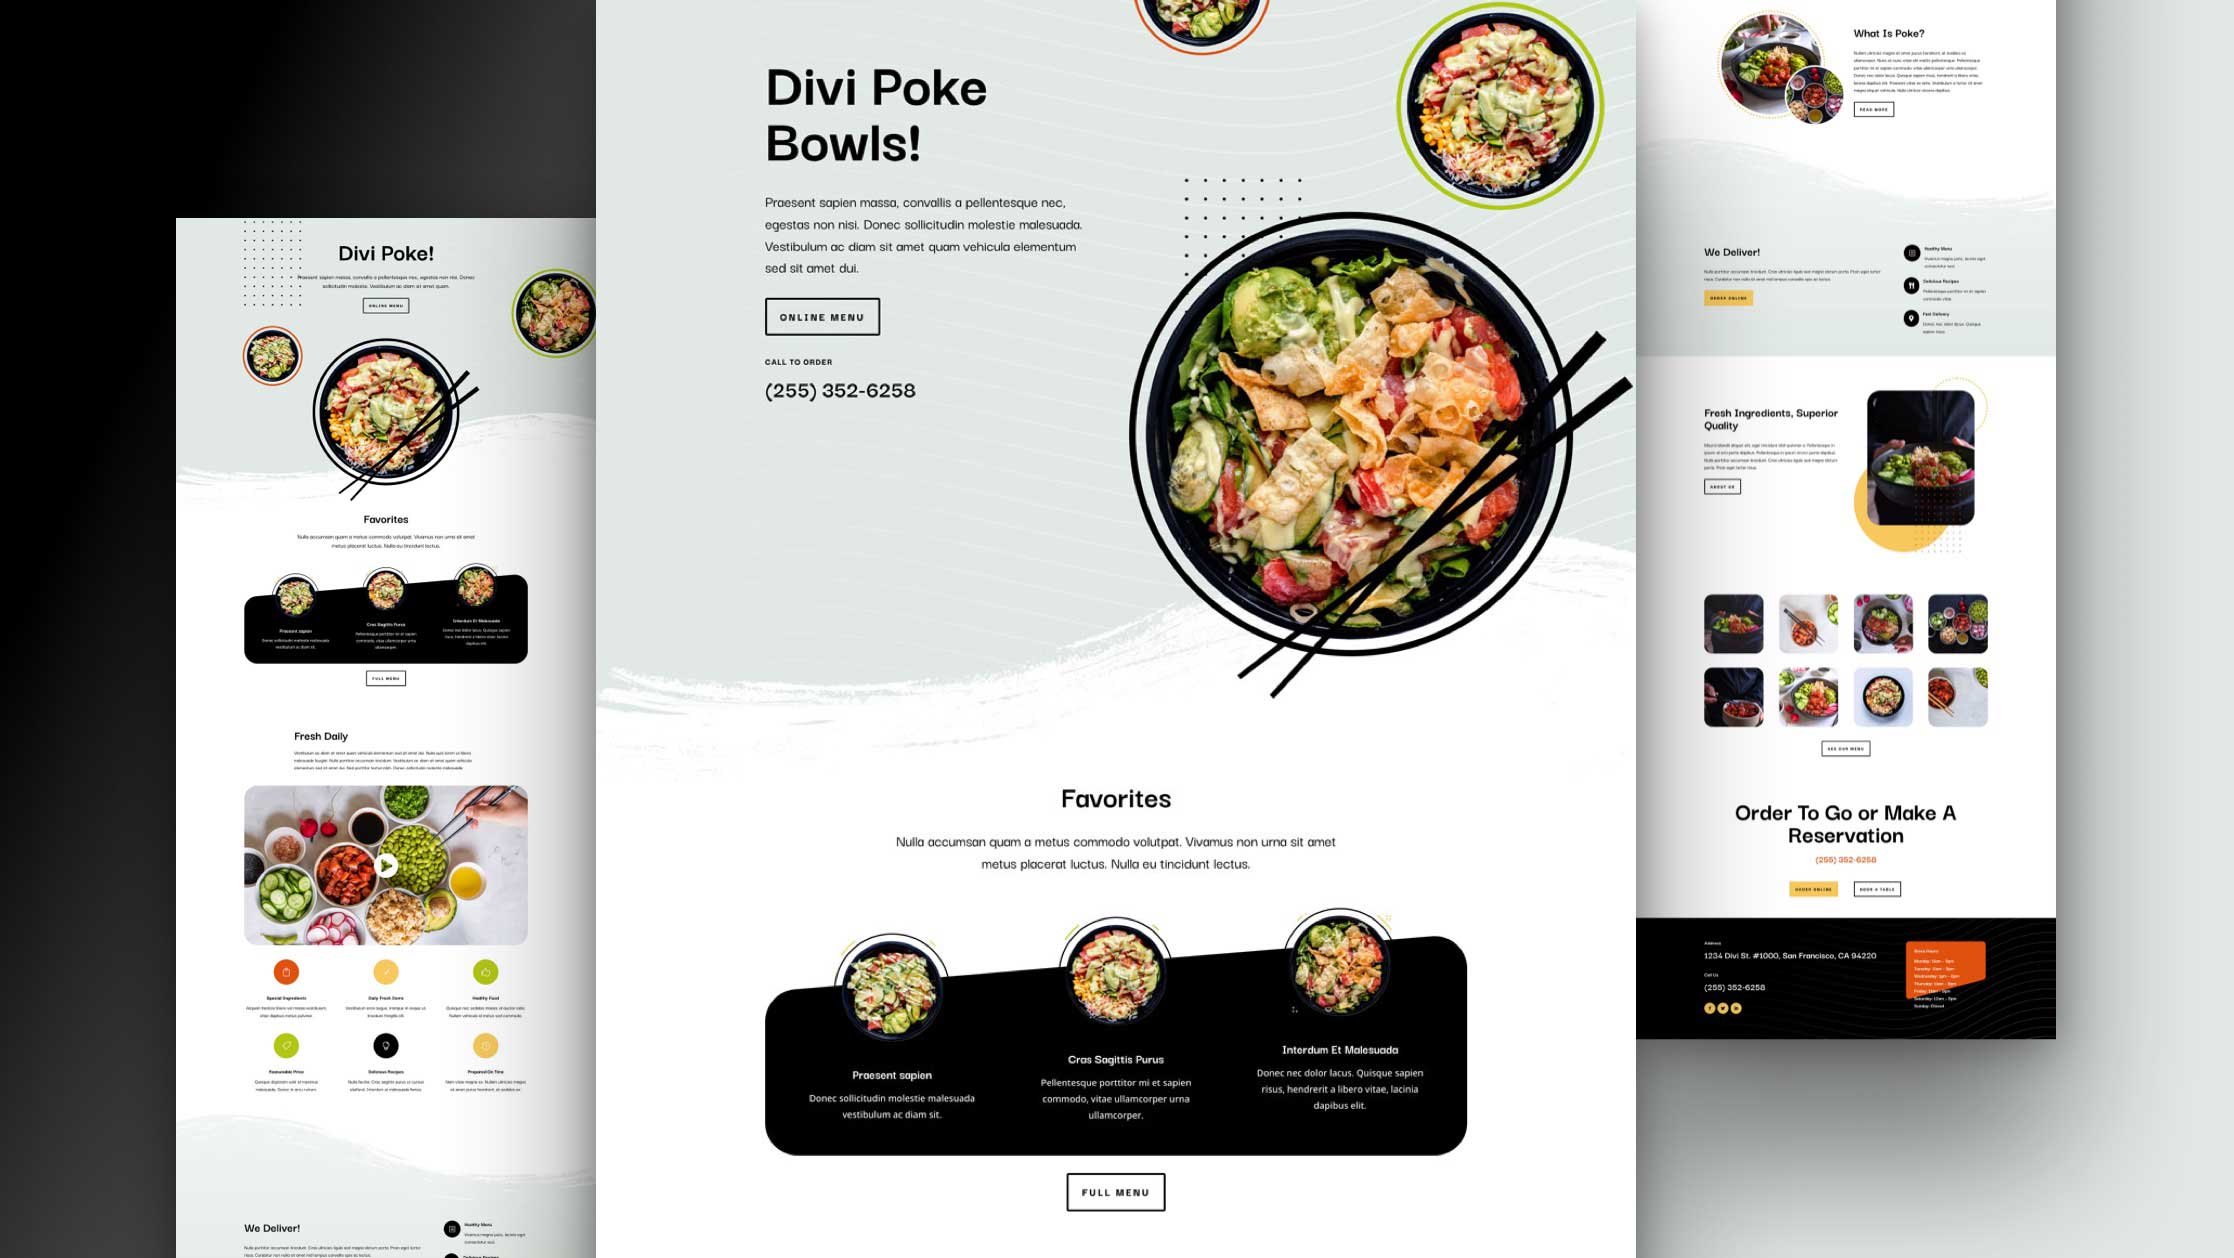 This WordPress restaurant theme is one of the most popular options for restaurants